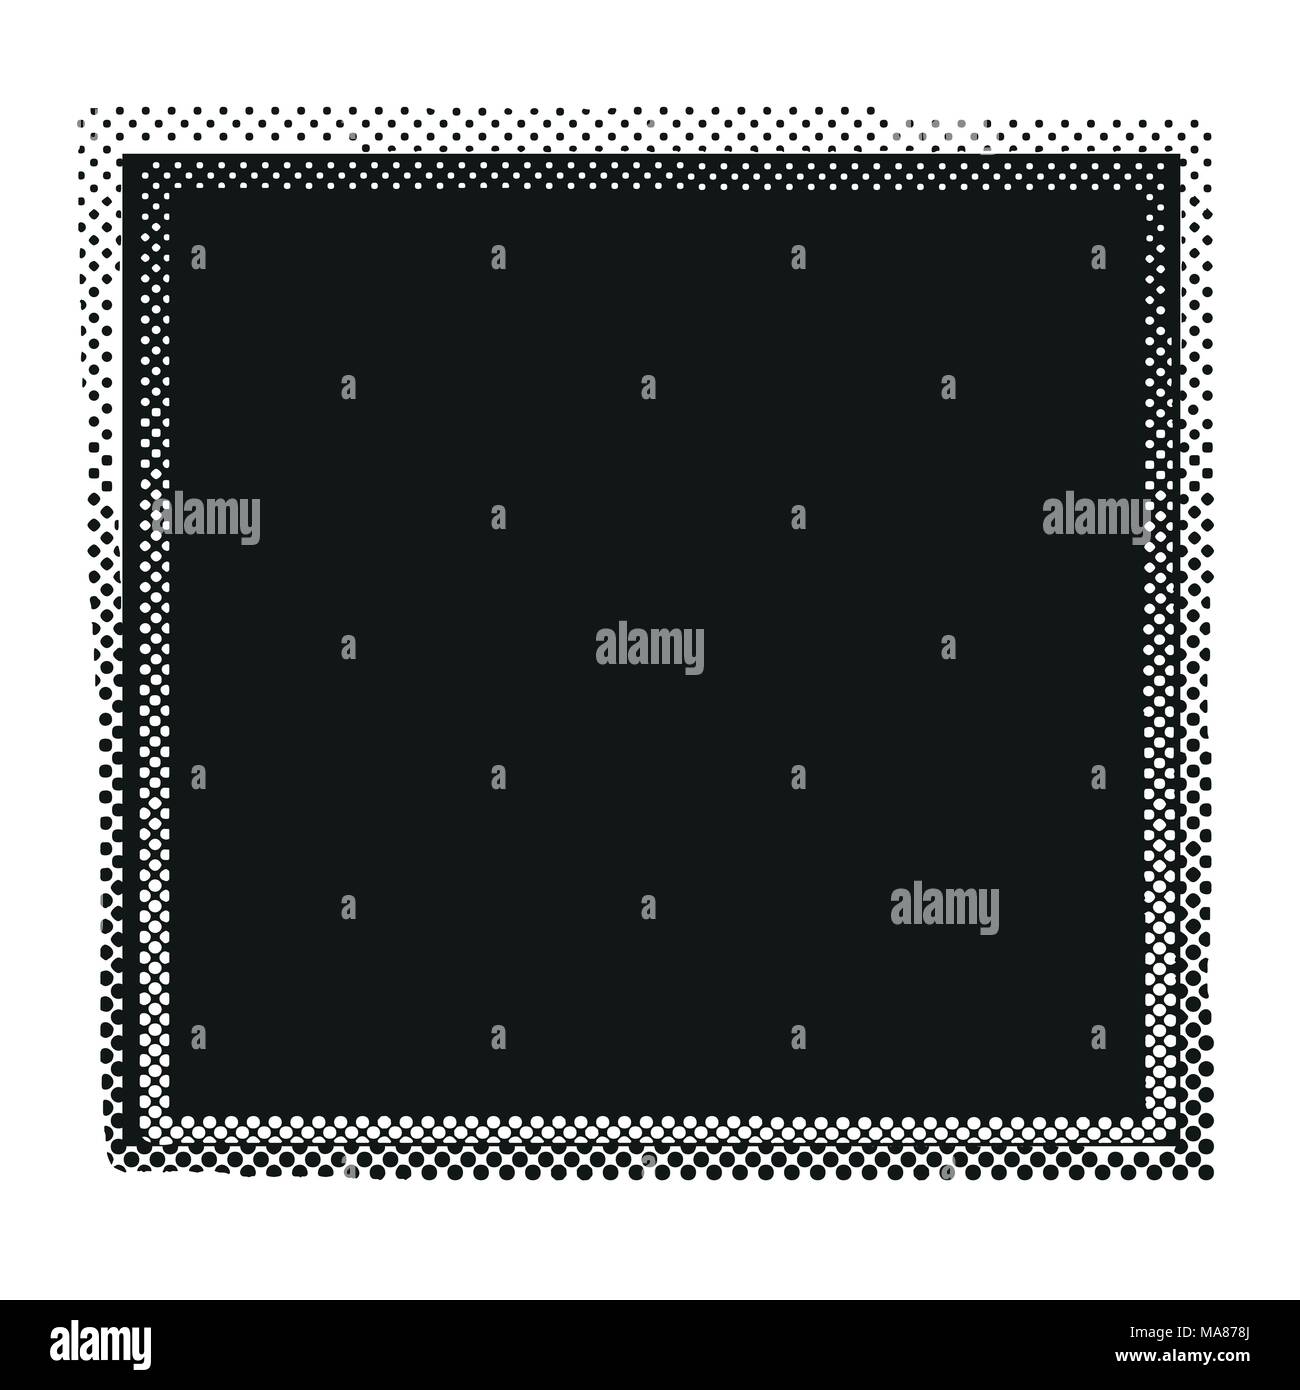 Abstract halftone dots frame. Vector grunge background. Stock Vector